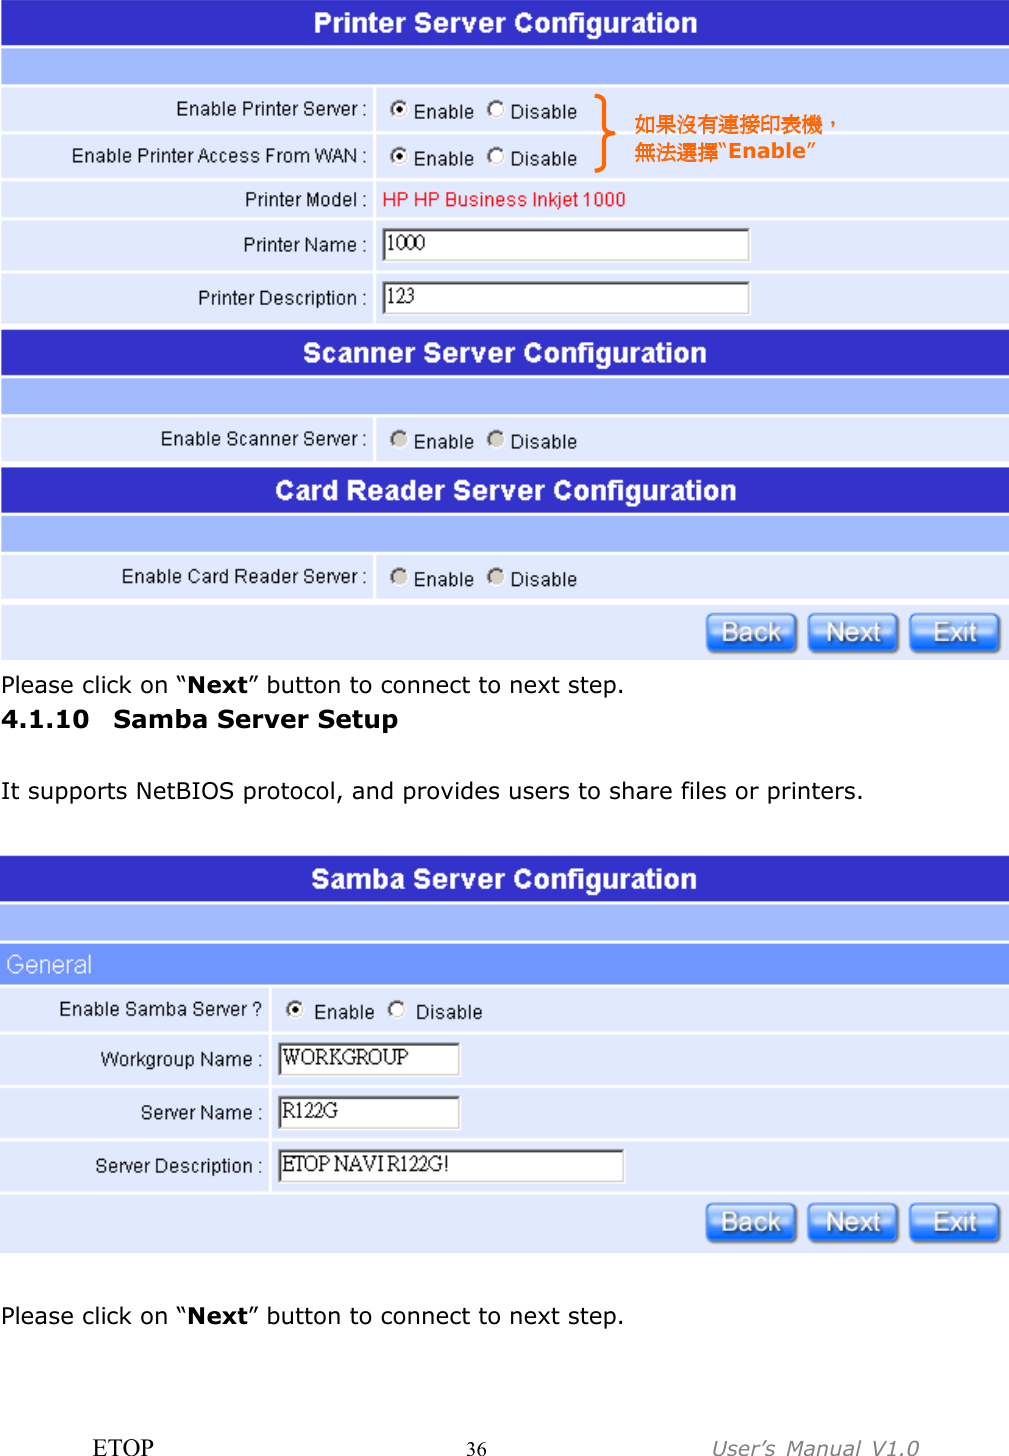 ETOP                         36                  User’s  Manual  V1.0   Please click on “Next” button to connect to next step. 4.1.10 Samba Server Setup  It supports NetBIOS protocol, and provides users to share files or printers.    Please click on “Next” button to connect to next step. 如果沒有連接印表機如果沒有連接印表機如果沒有連接印表機如果沒有連接印表機，，，， 無法選擇無法選擇無法選擇無法選擇“Enable” 